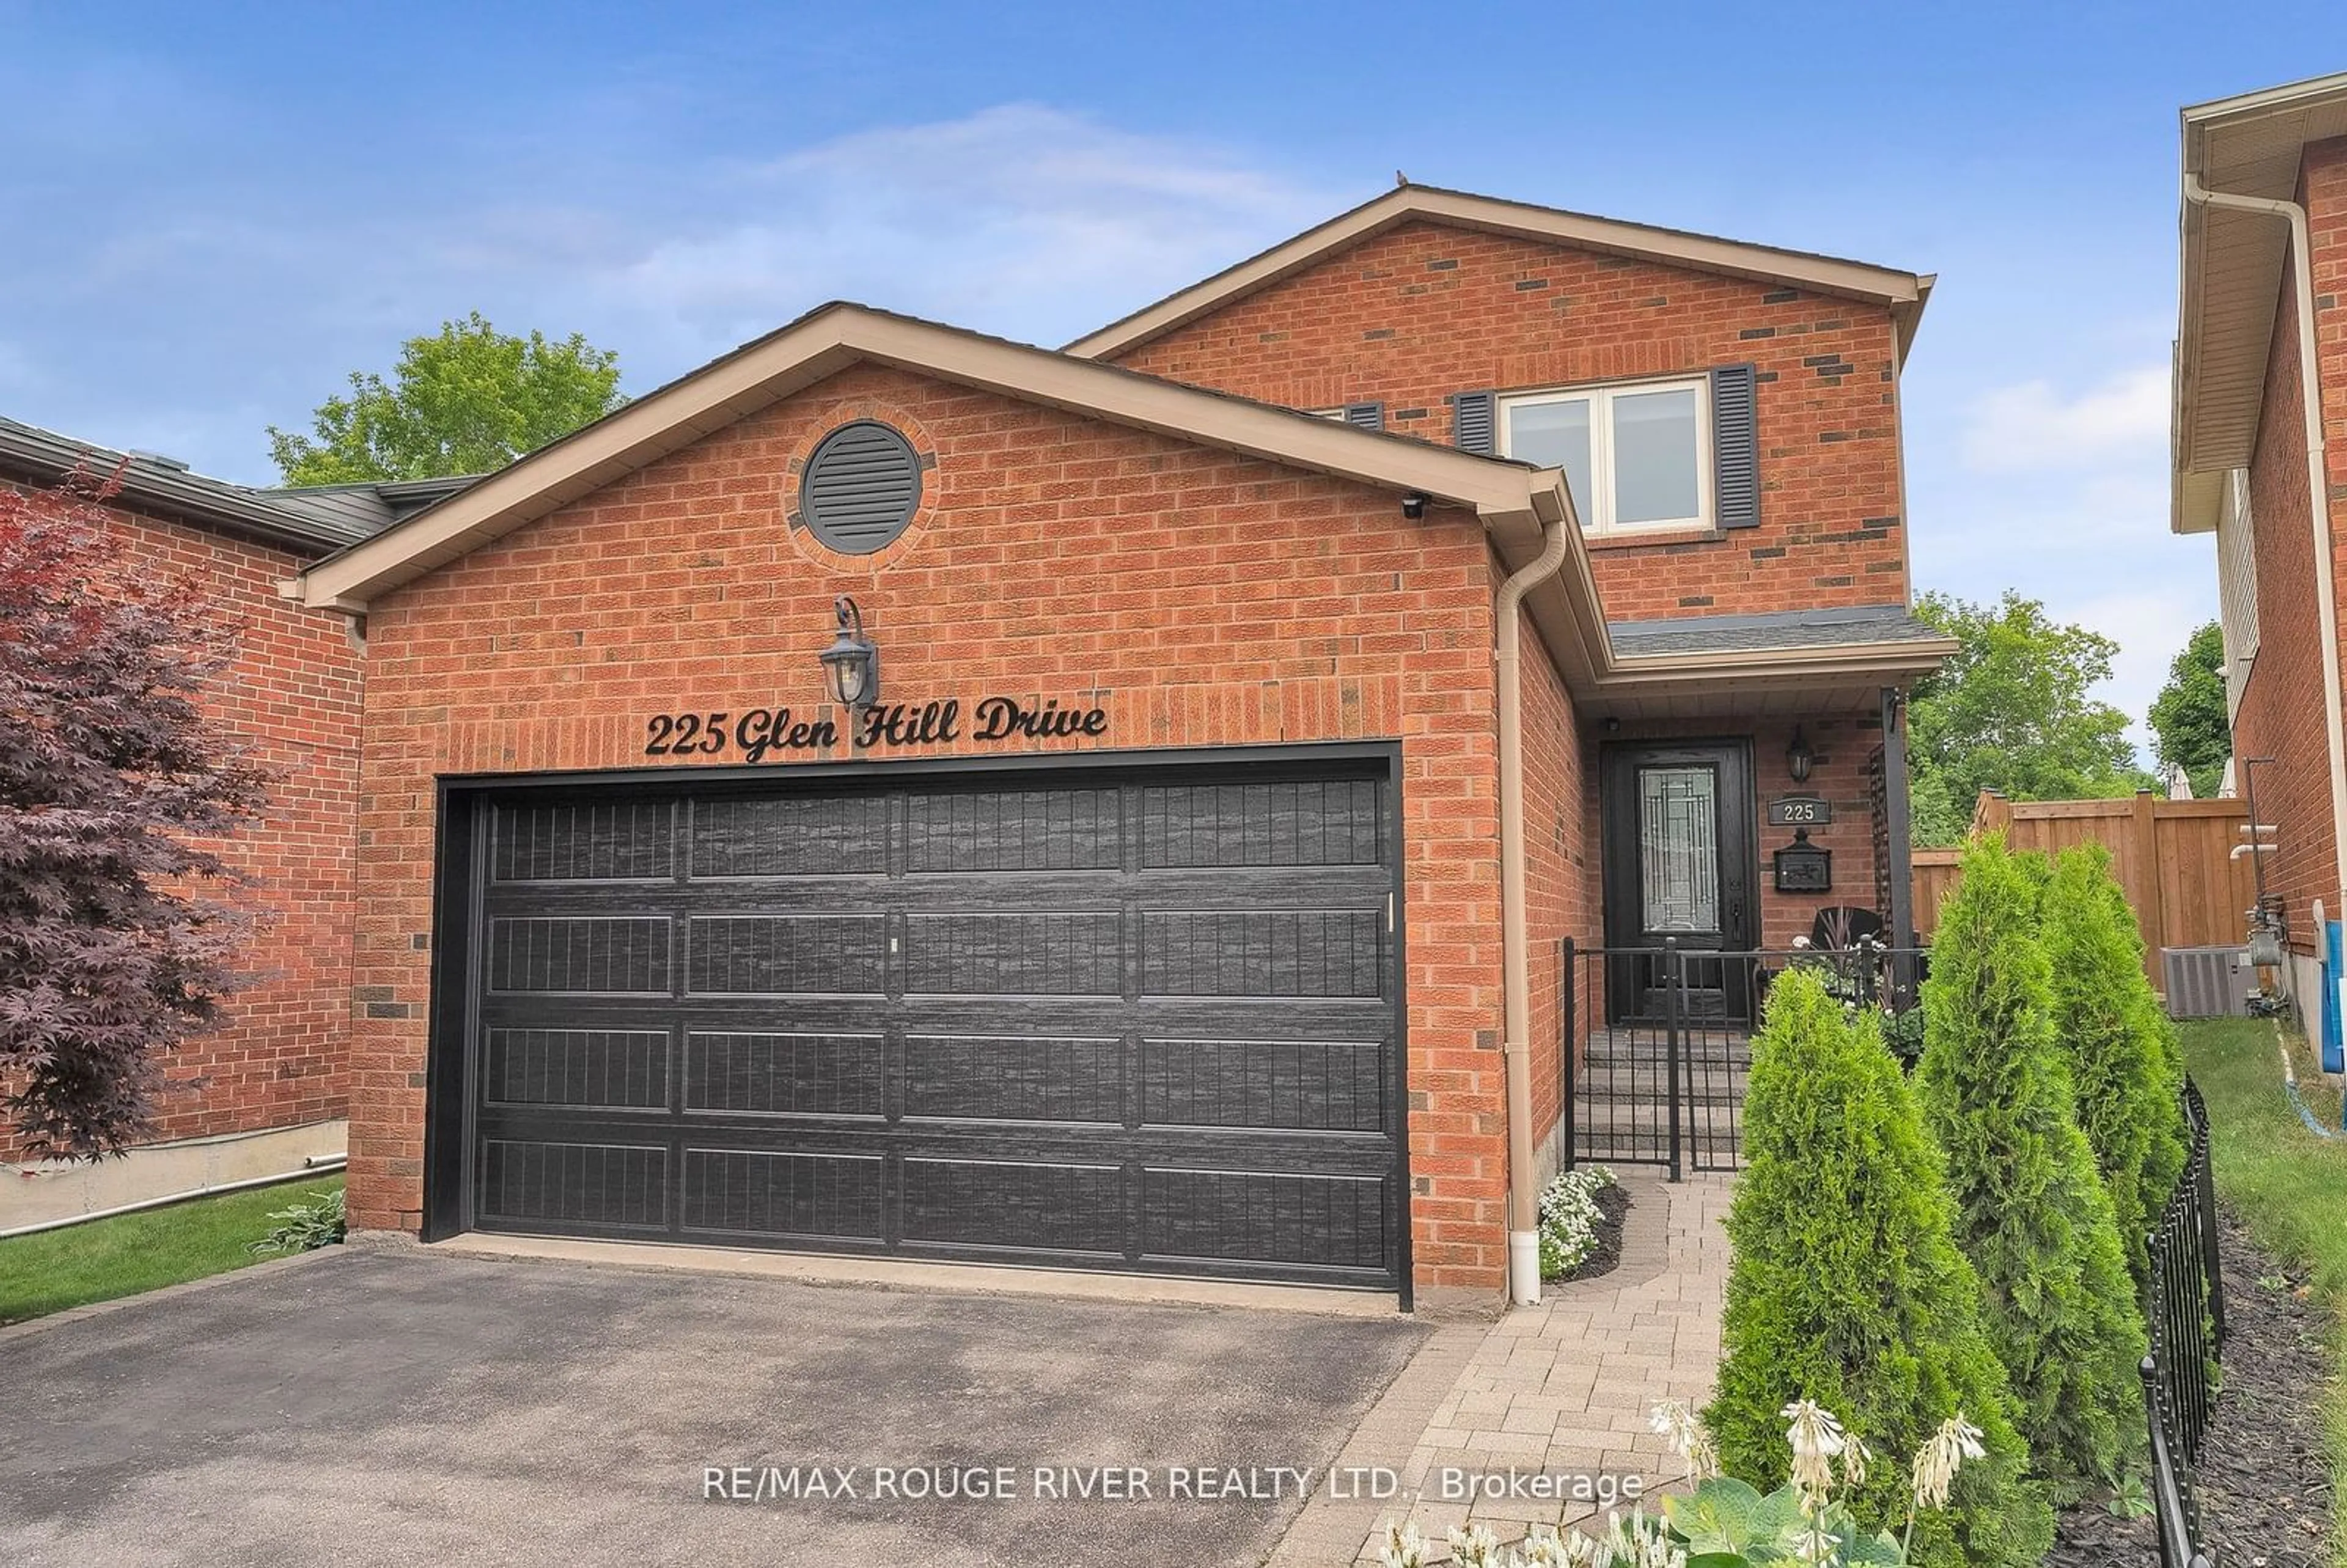 Home with brick exterior material for 225 Glen Hill Dr, Whitby Ontario L1N 7J5